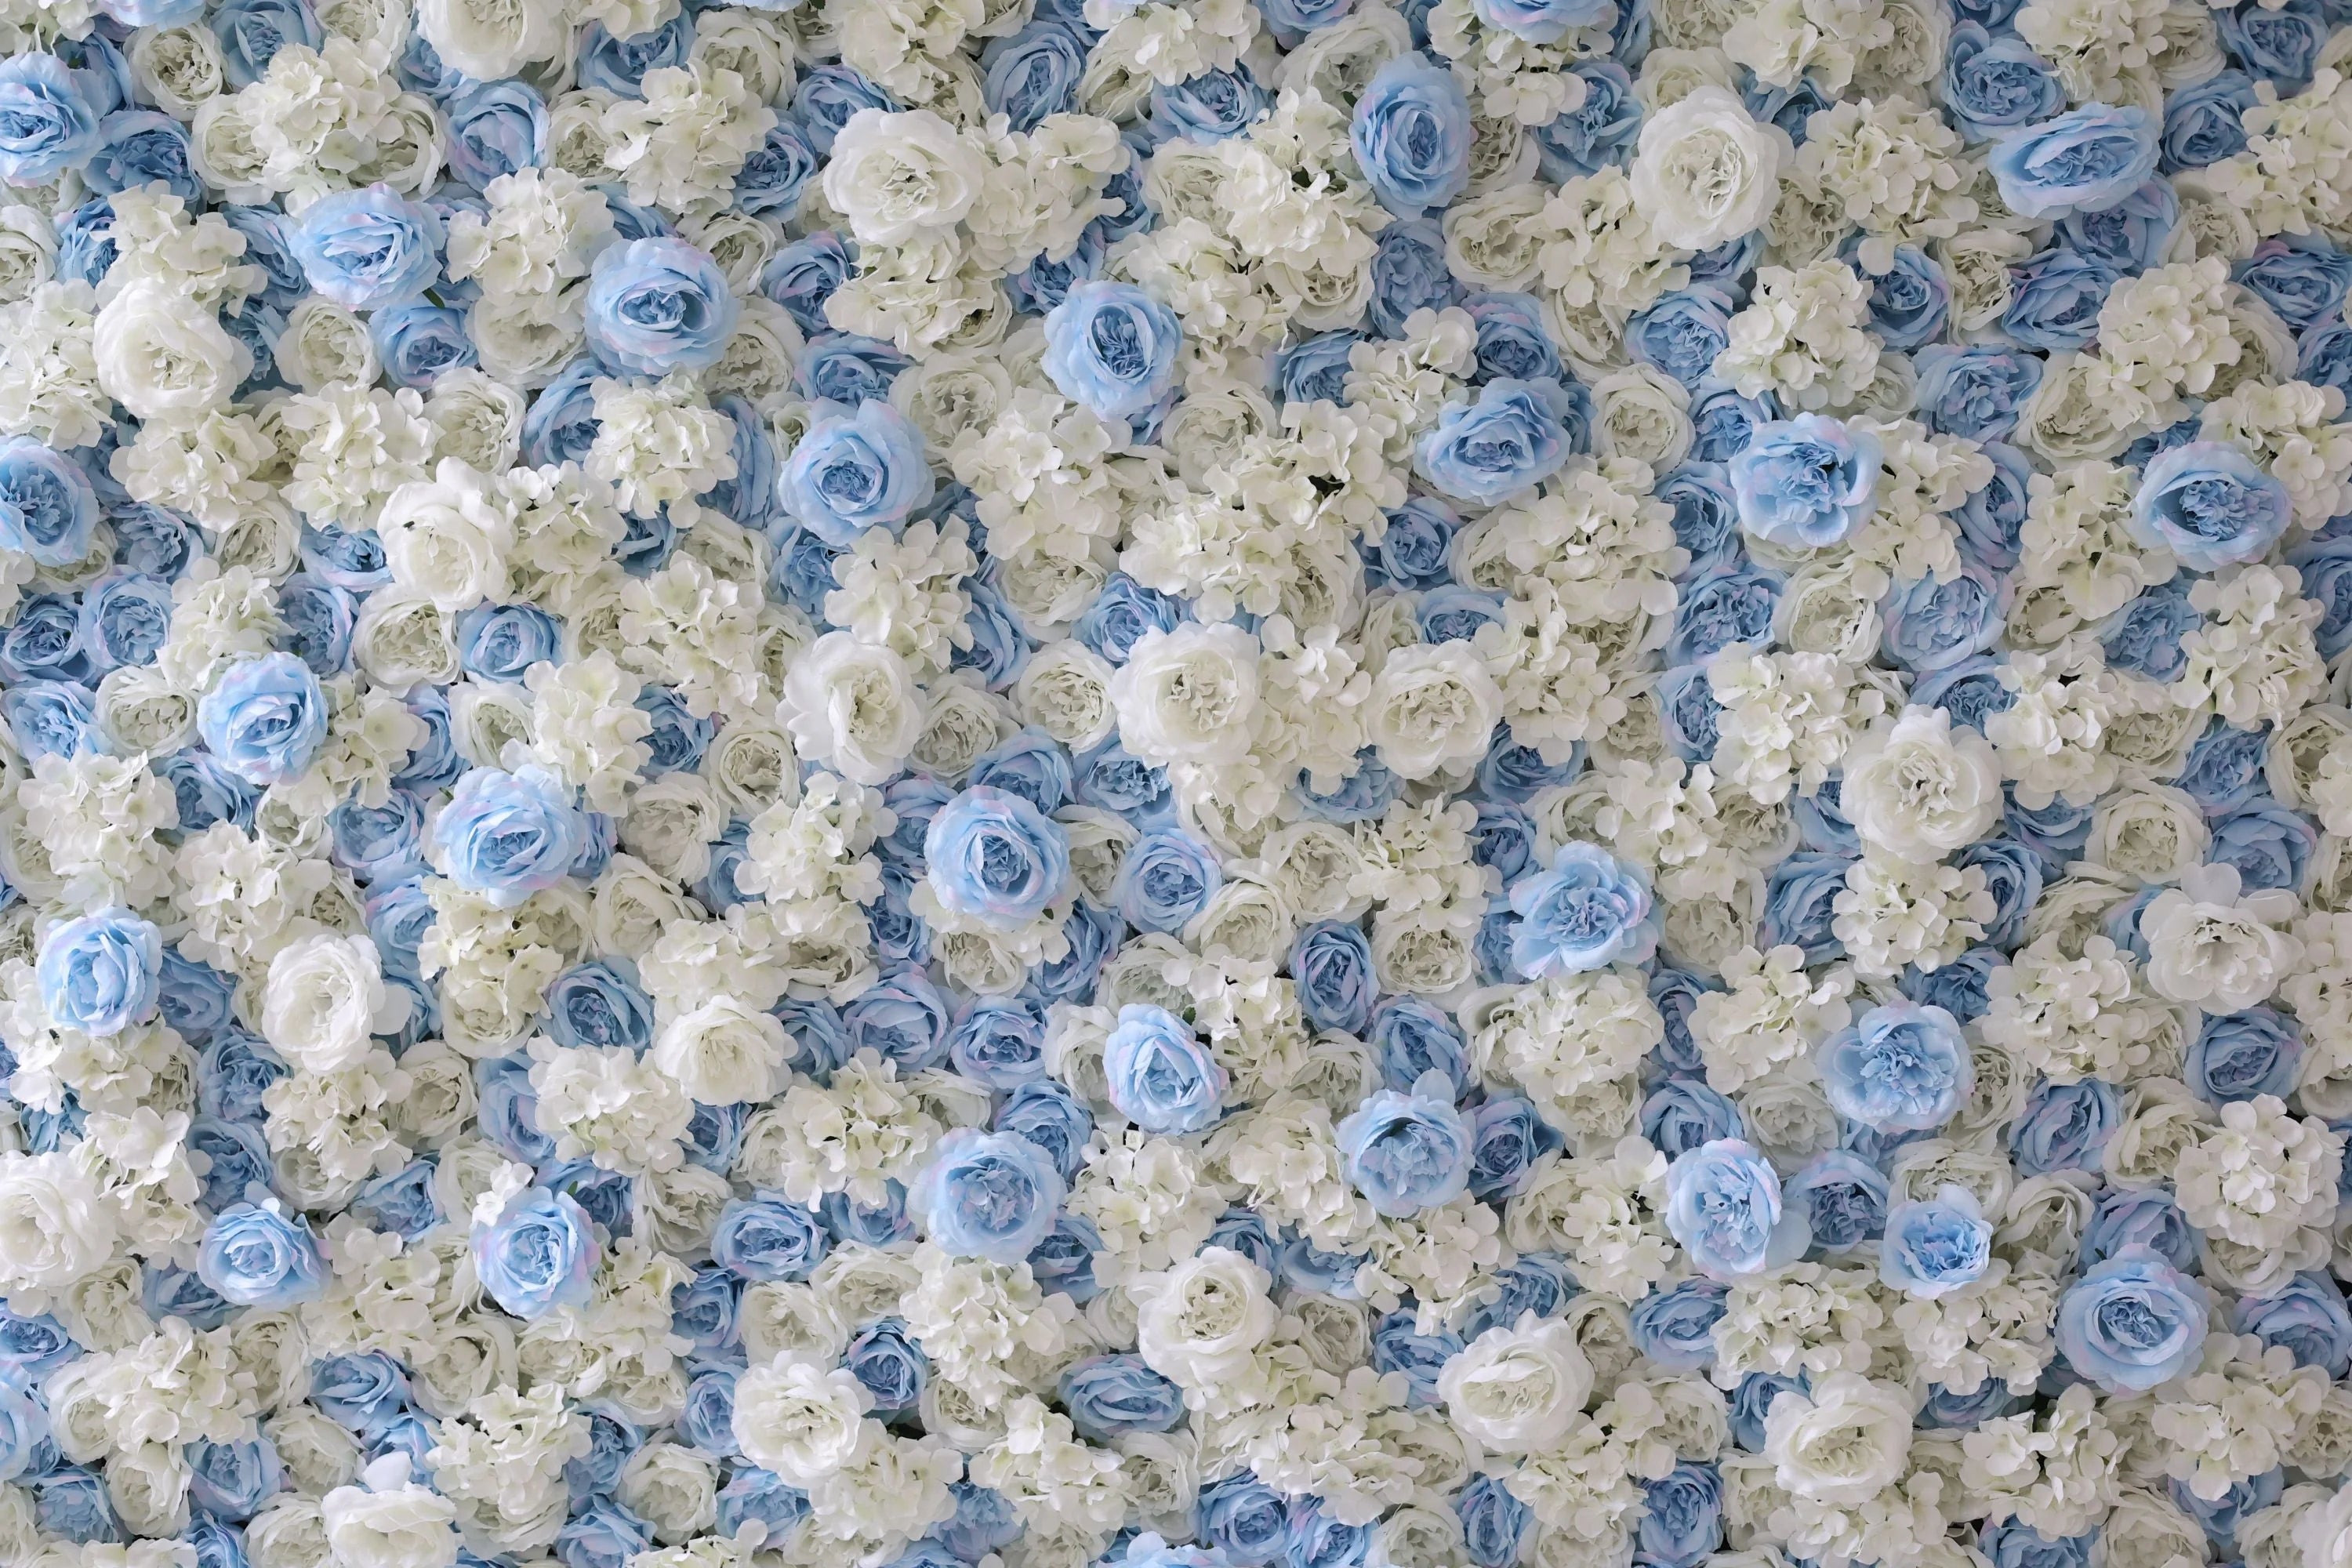 Flower Wall Tiffany Blue & White Fabric Rolling Up Curtain Floral Backdrop Wedding Party Proposal Decor